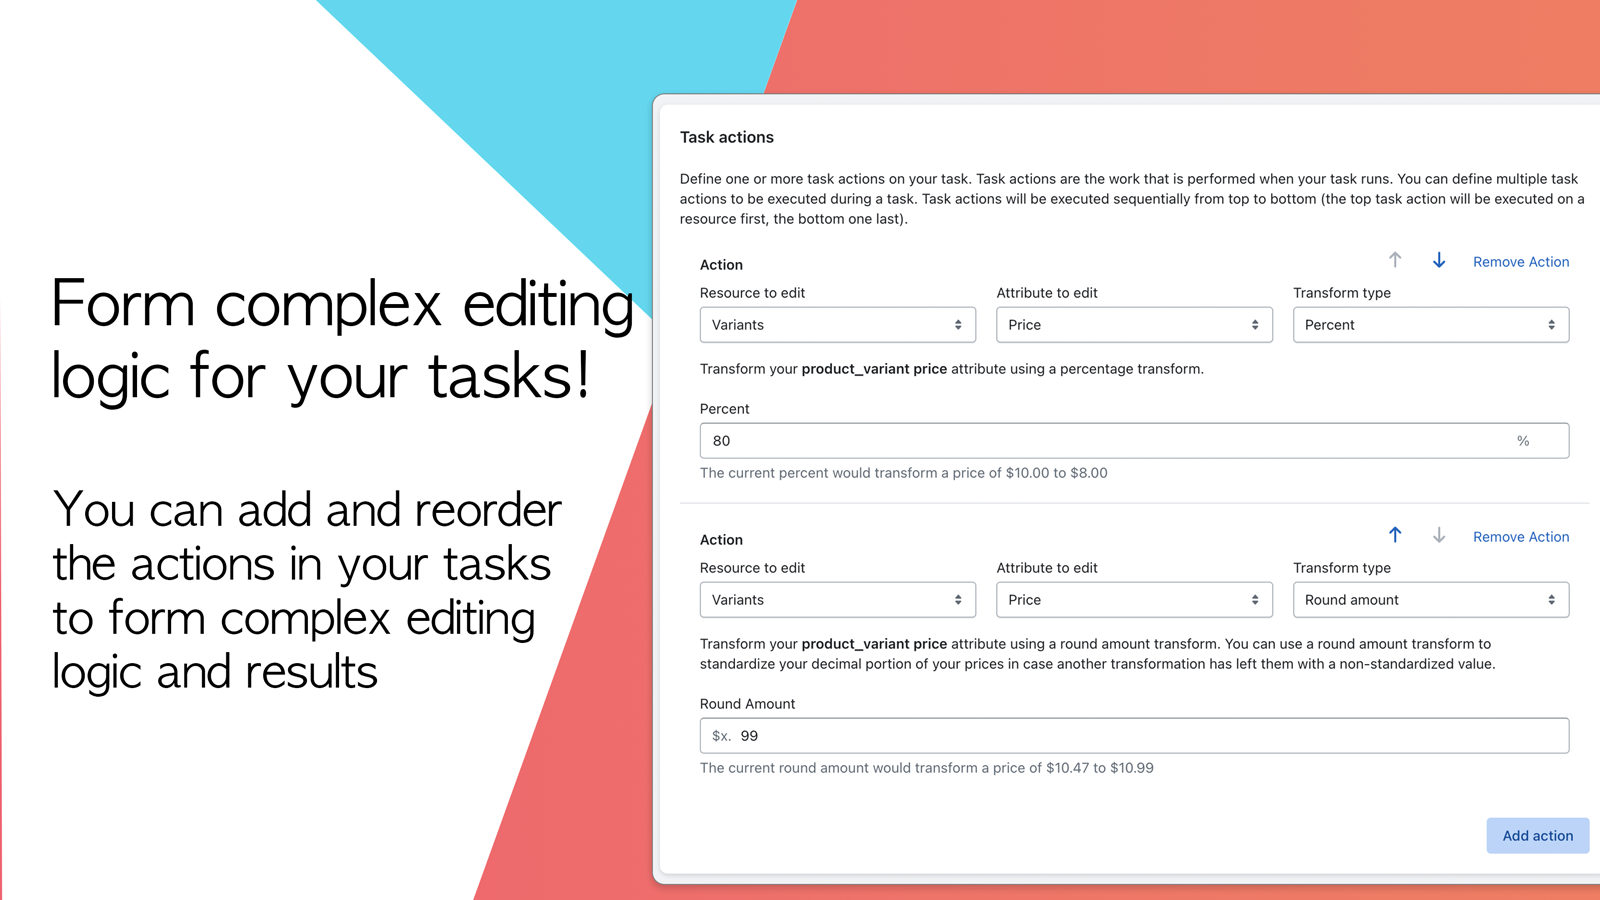 Form complex editing logic and workflows to fit your needs